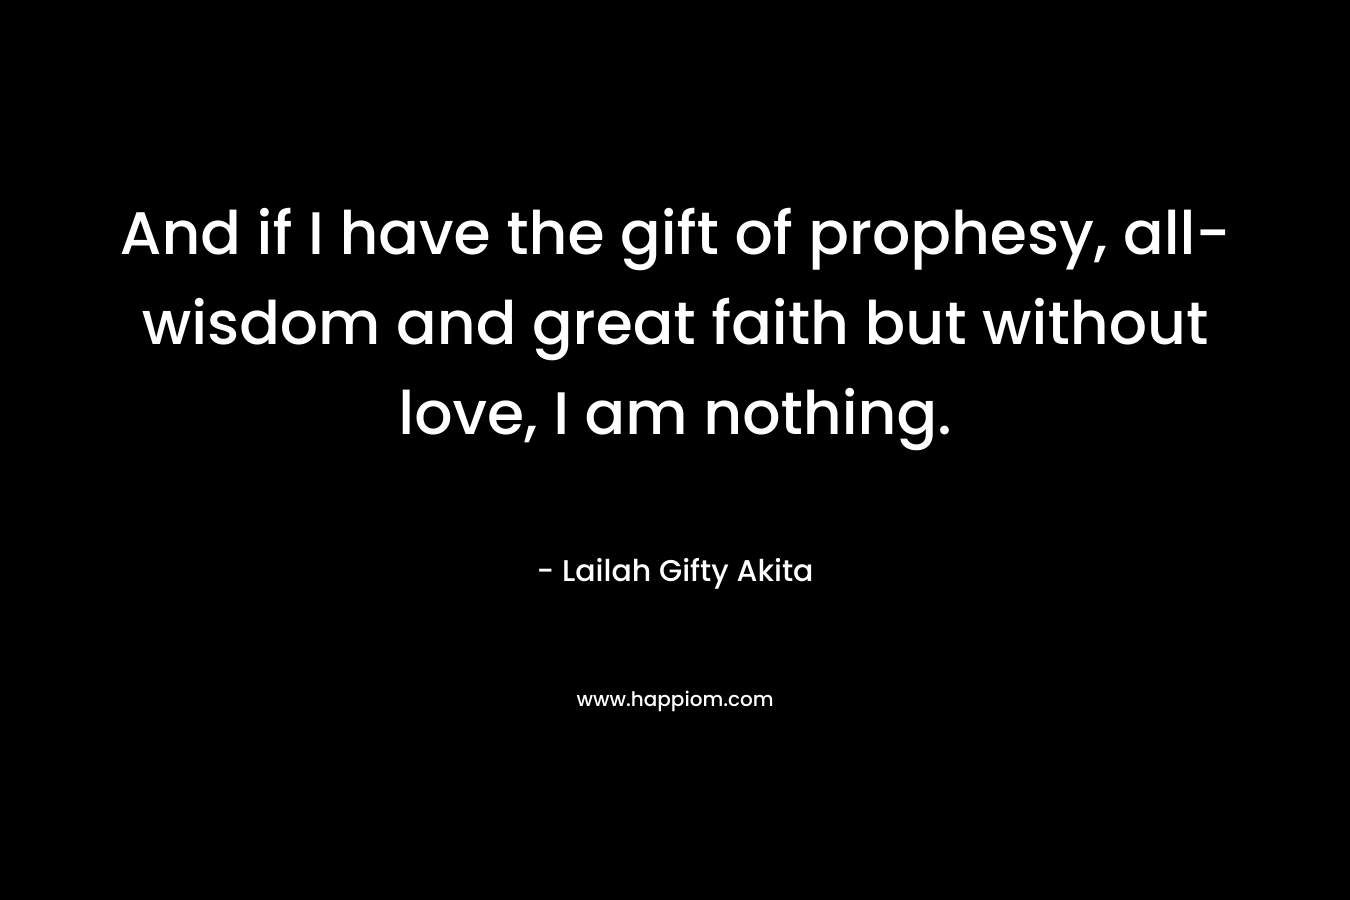 And if I have the gift of prophesy, all-wisdom and great faith but without love, I am nothing. – Lailah Gifty Akita